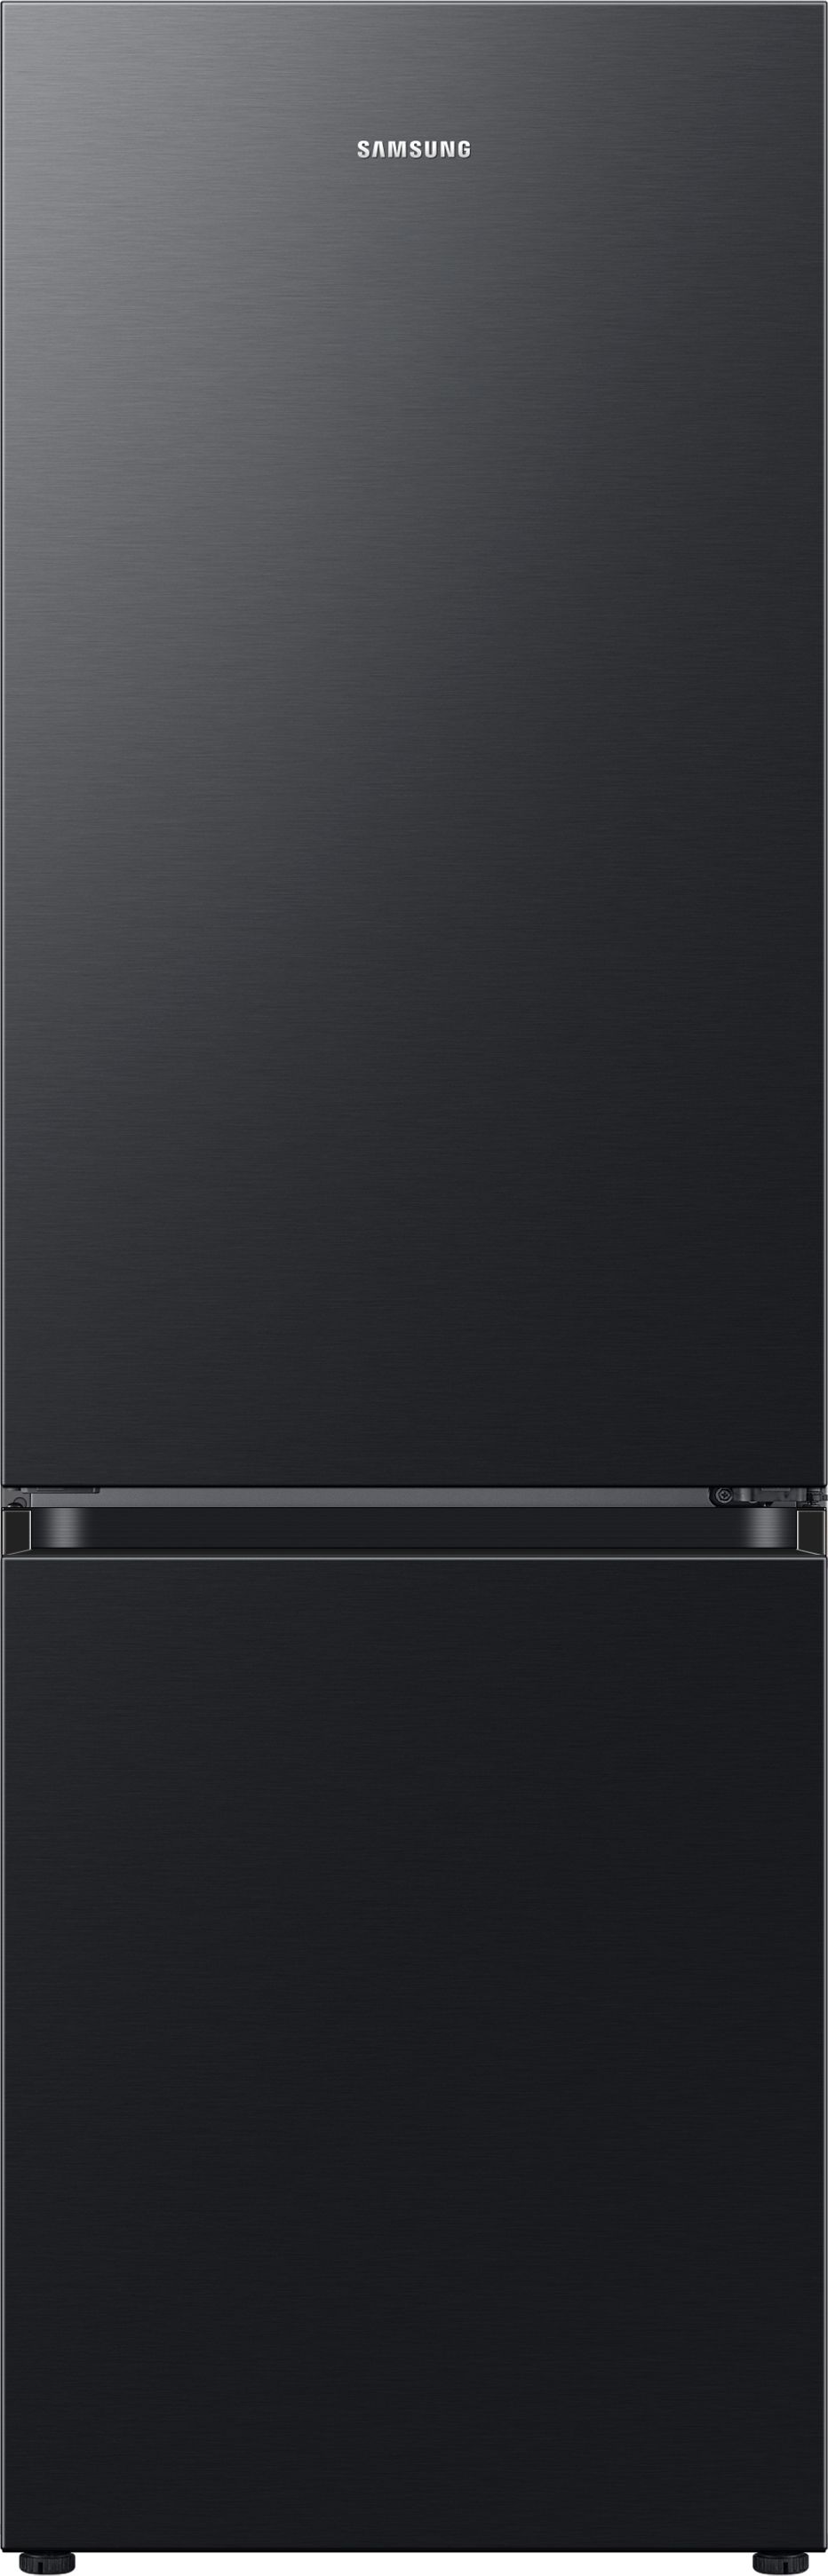 Samsung Series 4 RB34C600EBN Wifi Connected 60/40 No Frost Fridge Freezer - Black - E Rated, Black